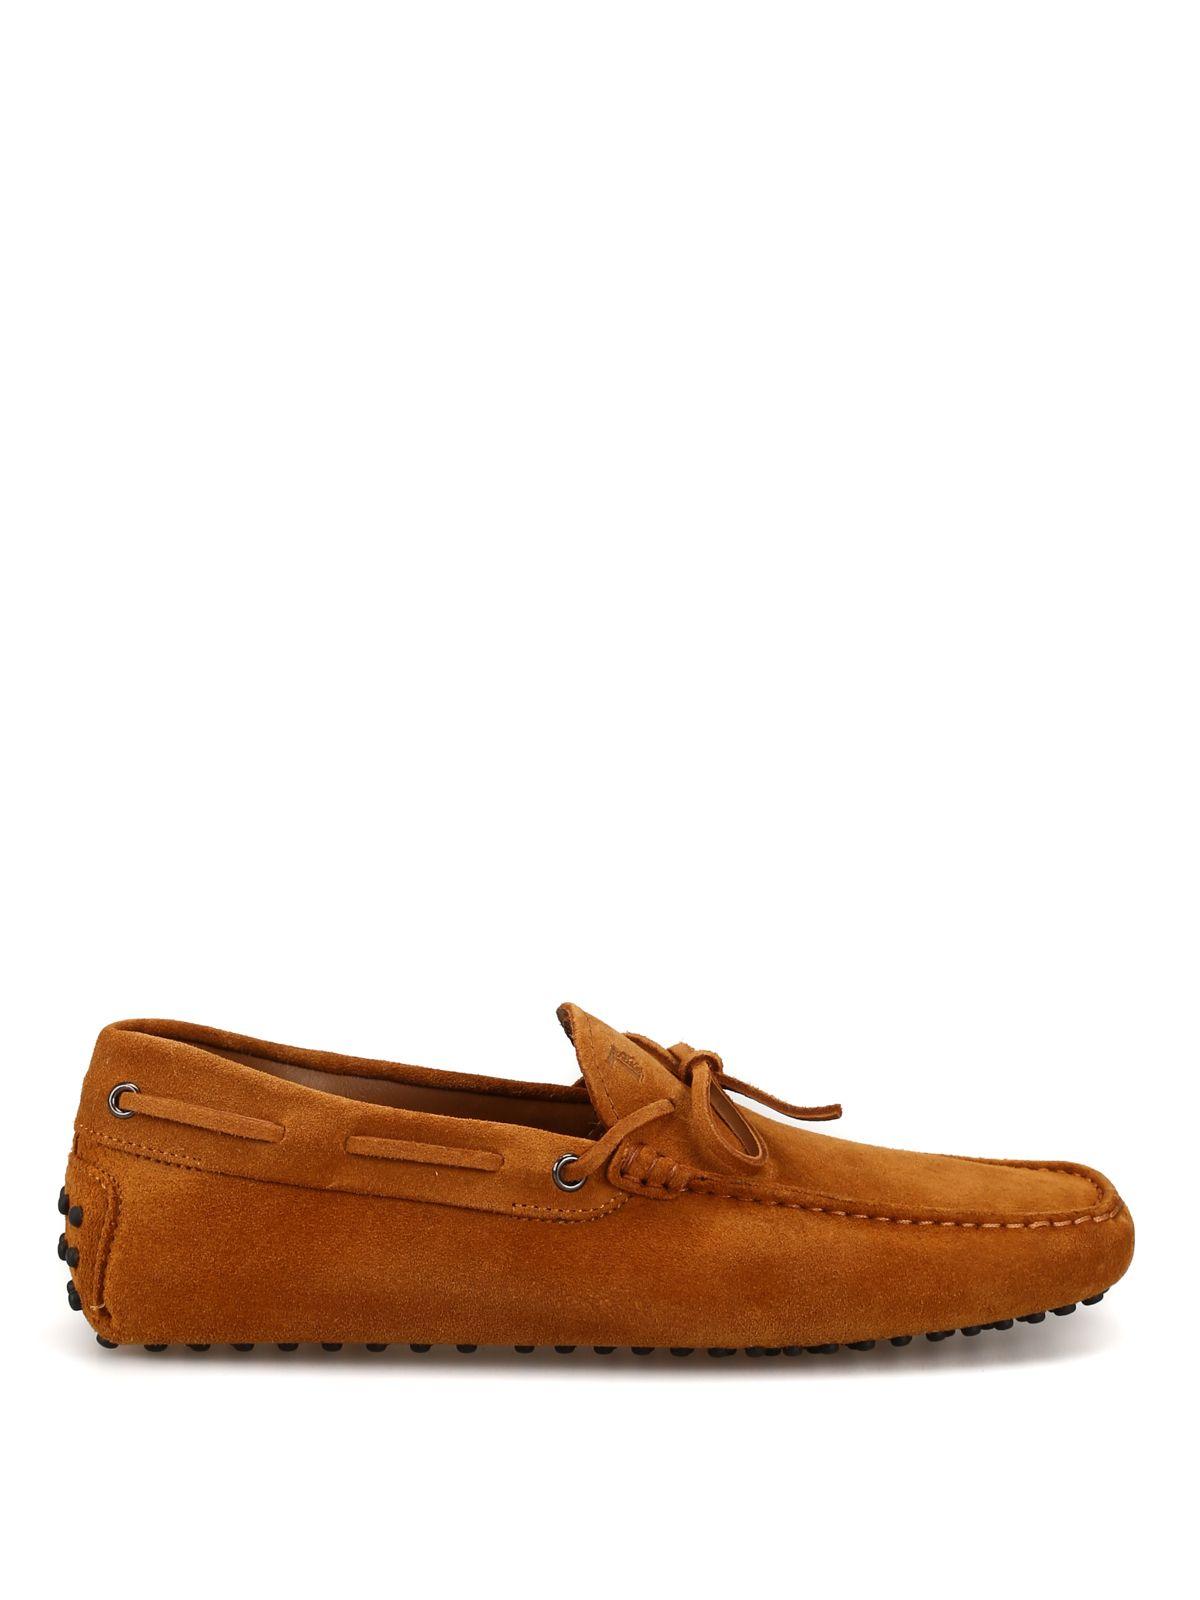 Tod's Orange Suede Loafers for Men - Lyst